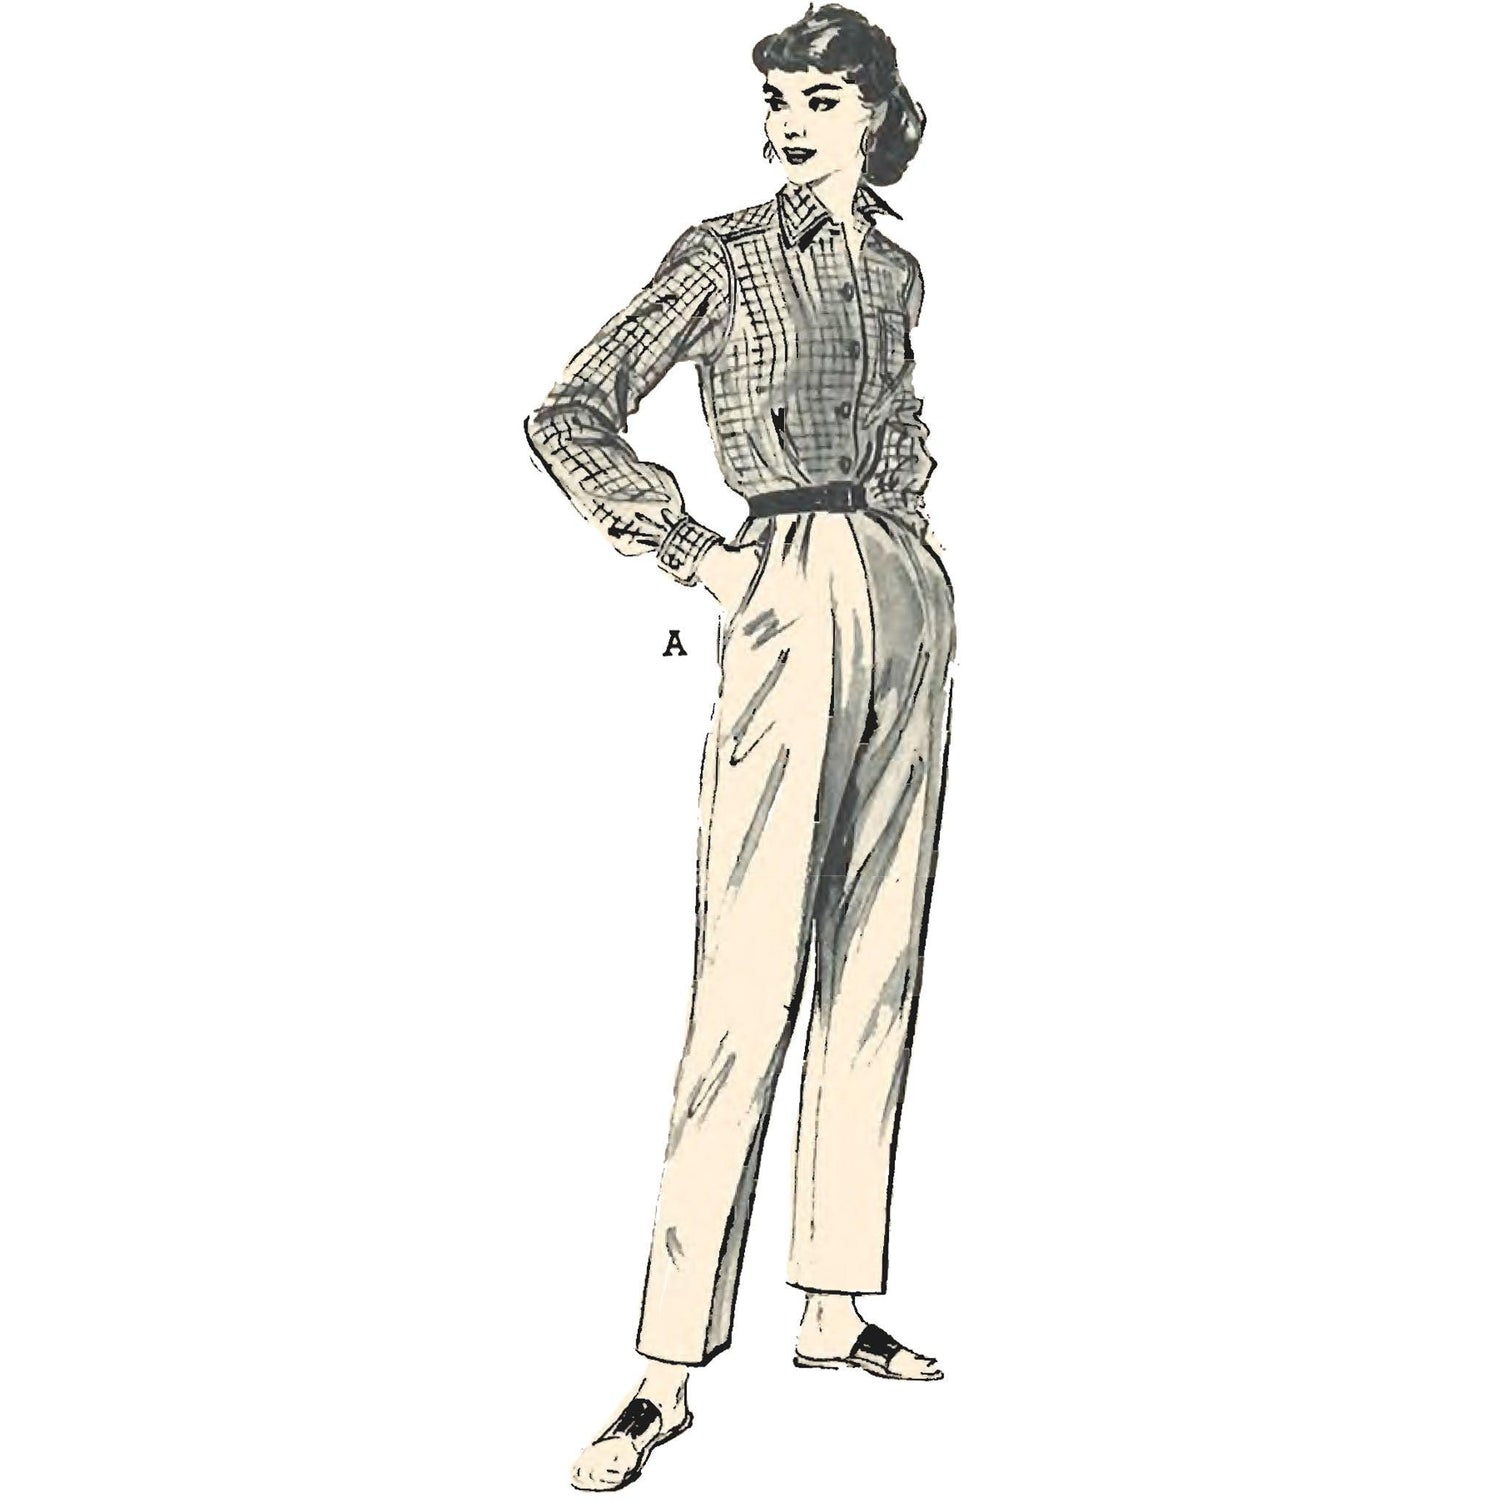 Woman wearing pedal pushers. Centre, front view, wearing cigarette pants. Right, back view, wearing cigarette pants. Made using Butterick 6592 sewing pattern